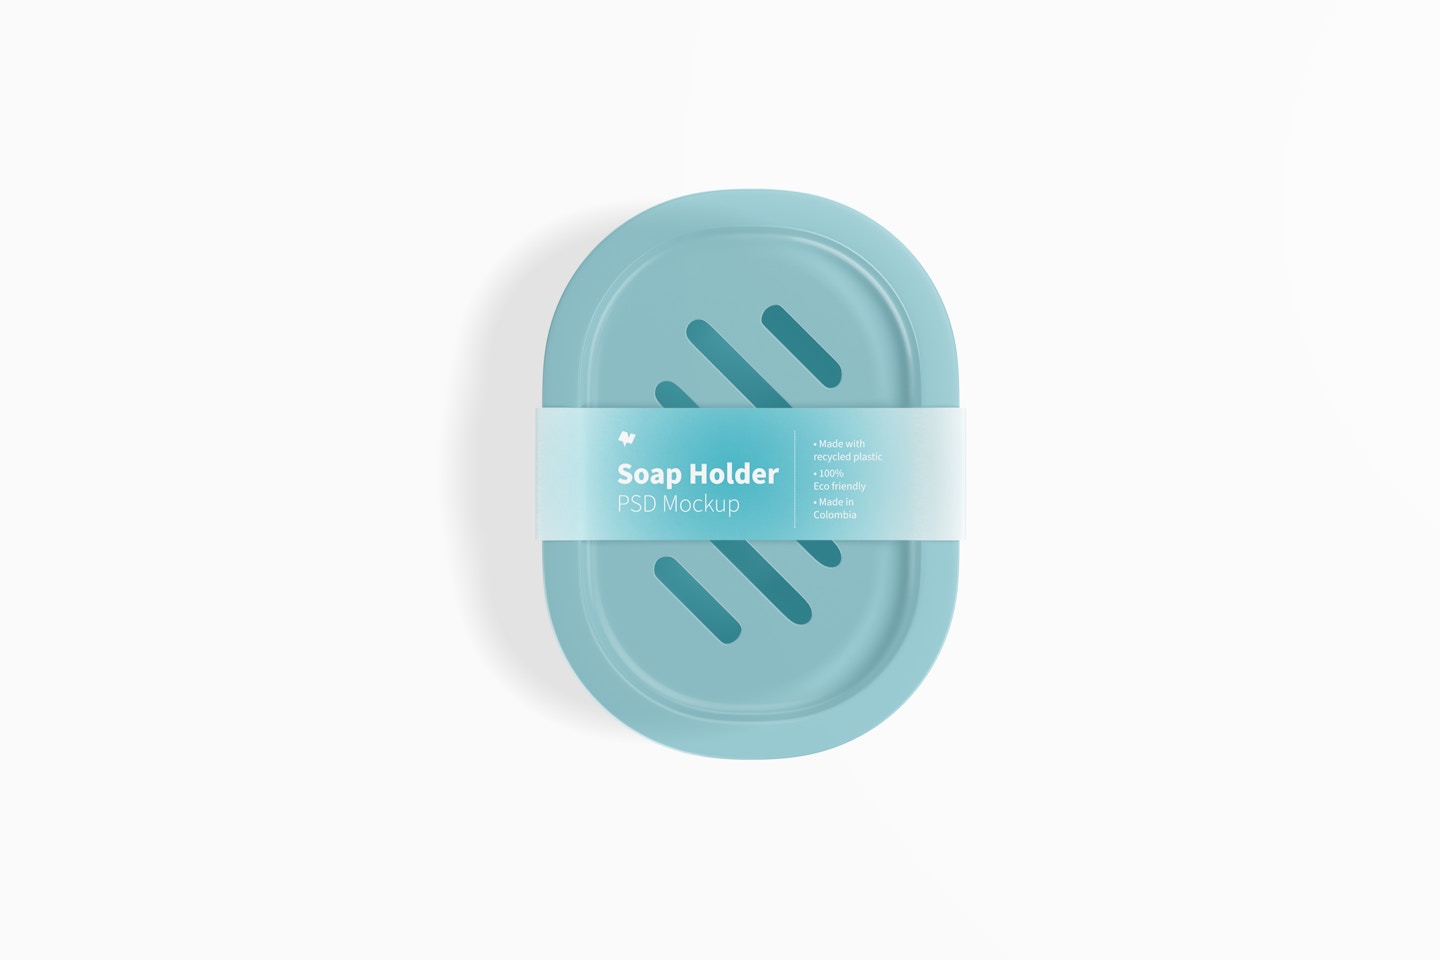 Soap Holder Mockup, Top View